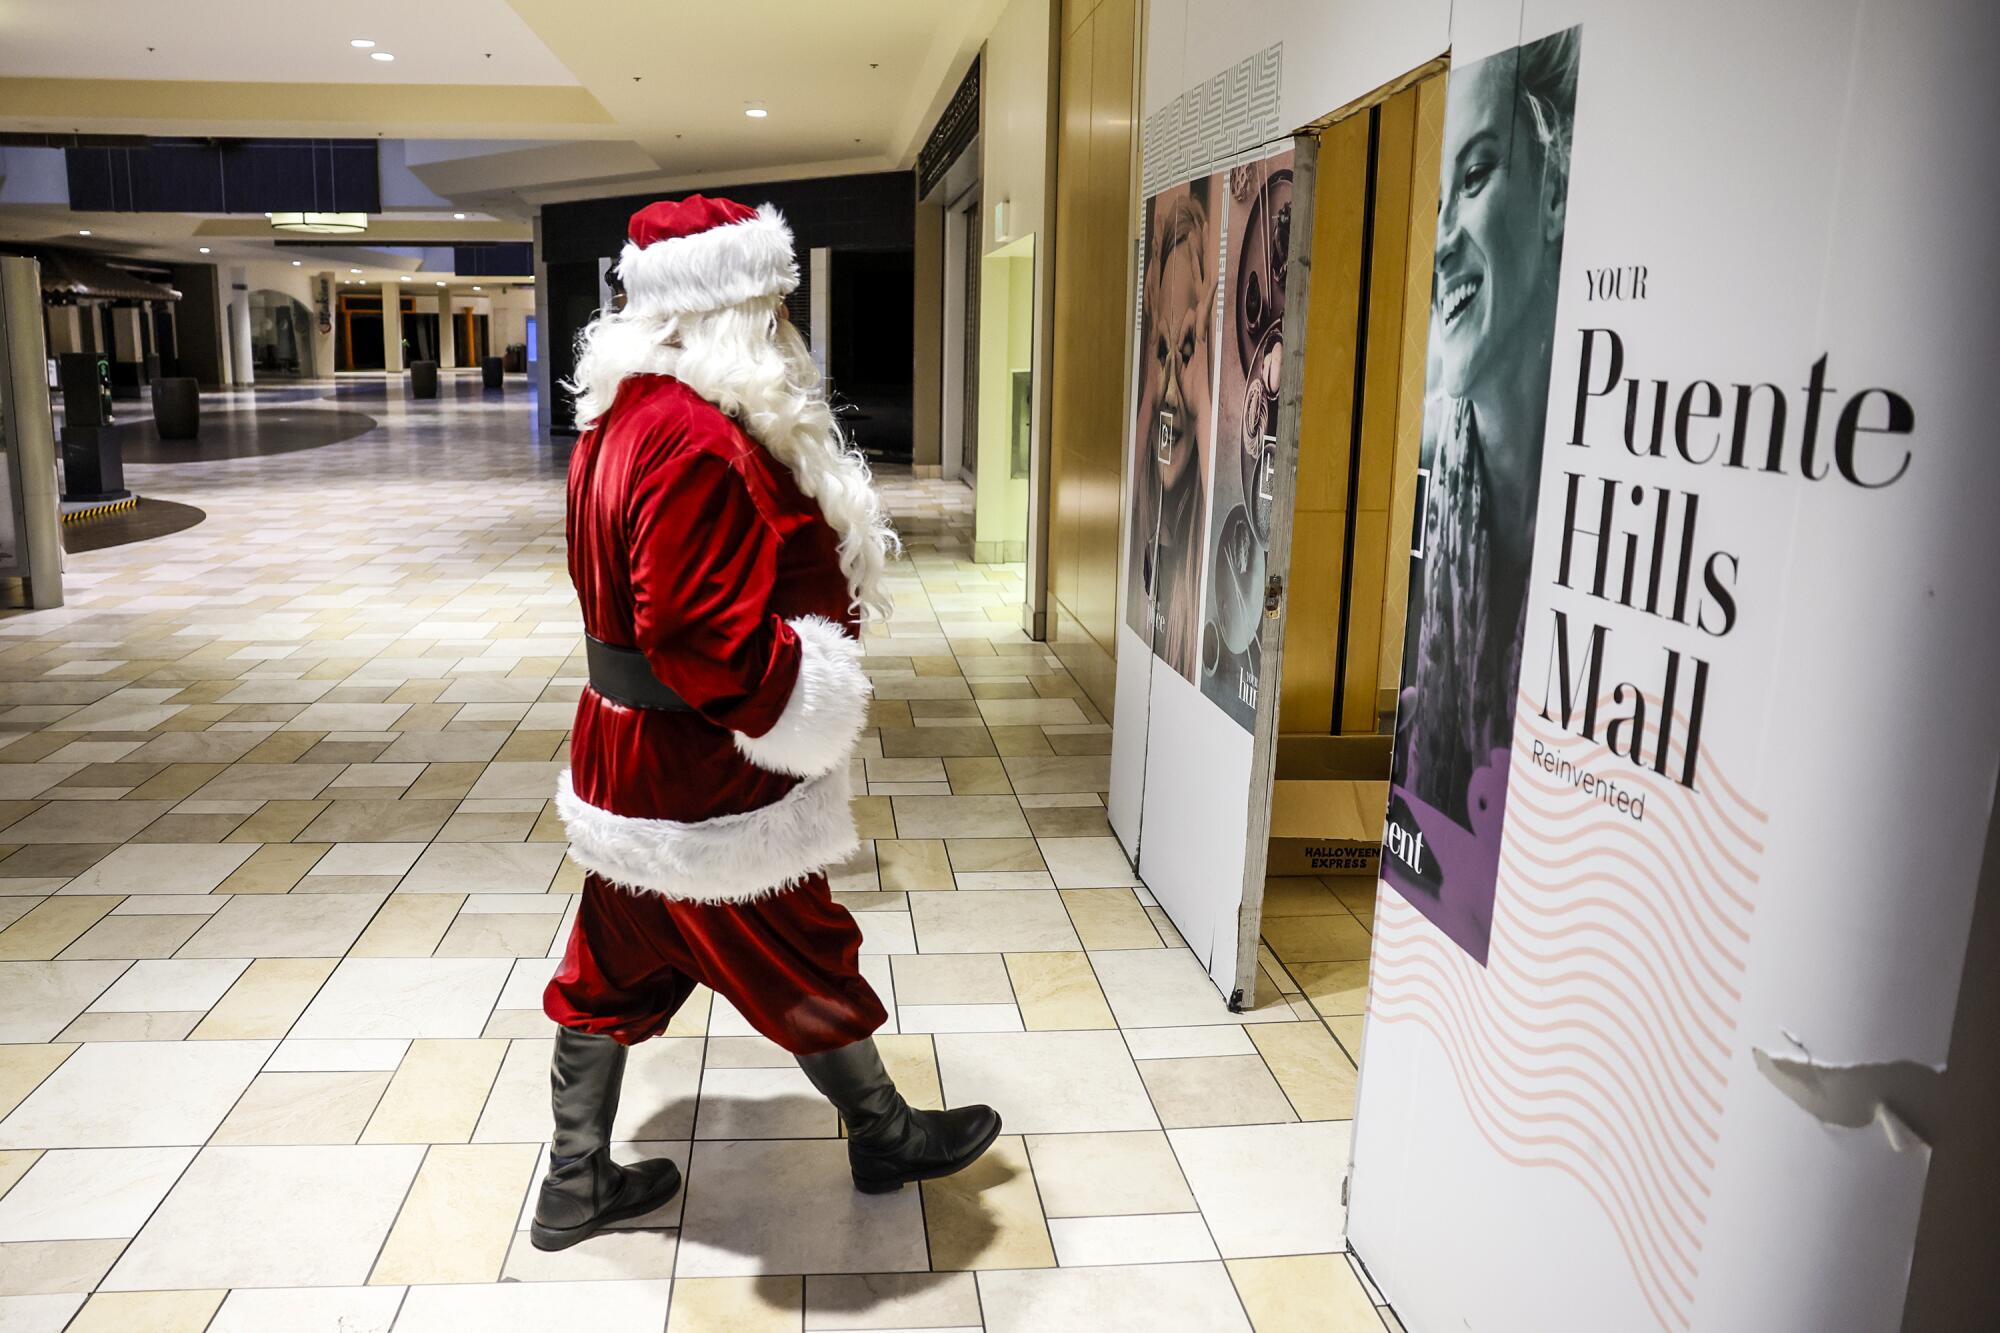 Santa Claus, a.k.a. Albert Sanchez, heads to the break room during his shift at the Puente Hills Mall.